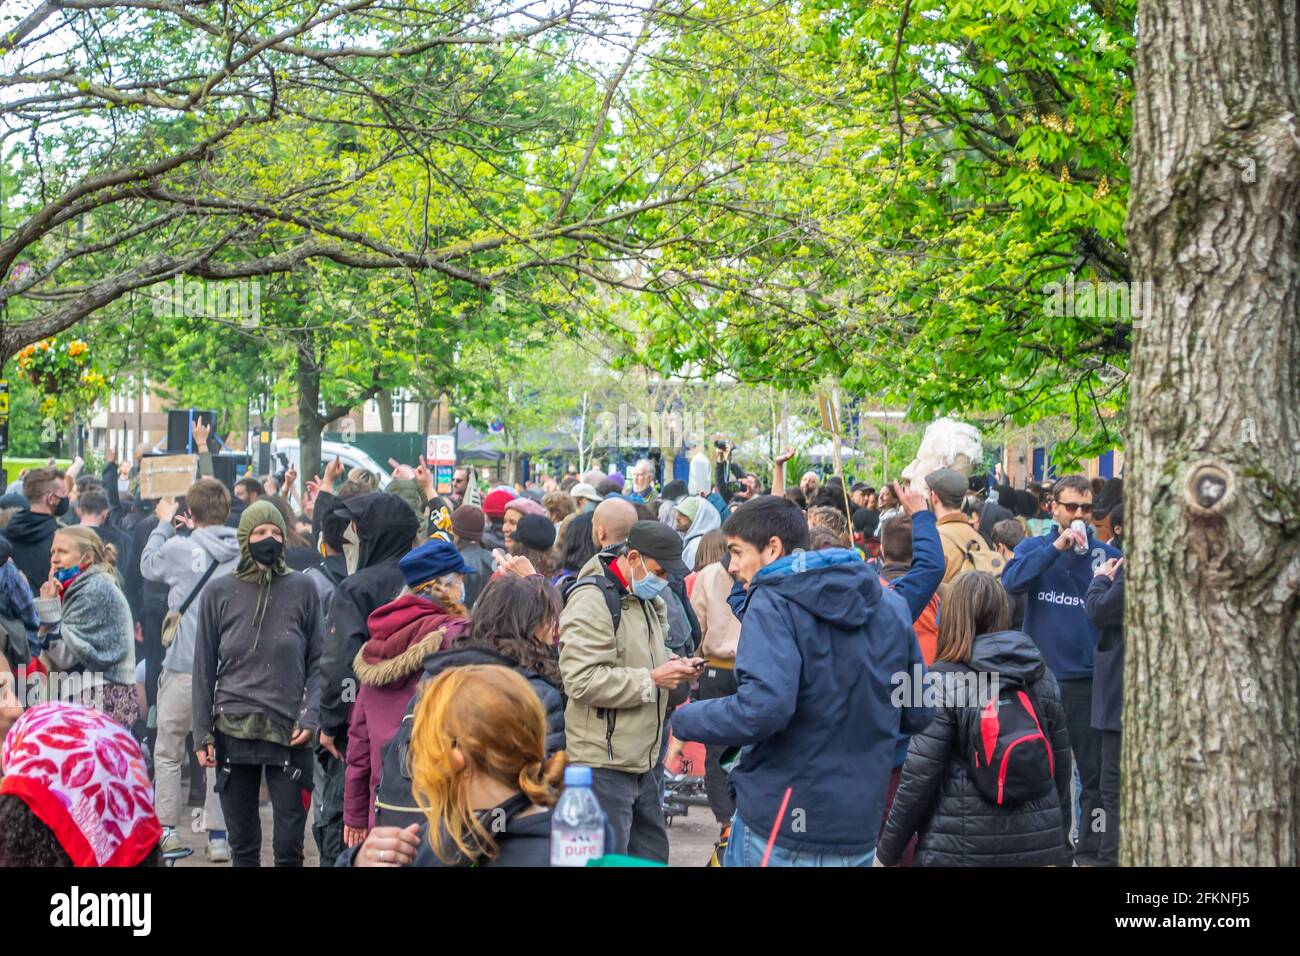 VAUXHALL, LONDON, ENGLAND- 1 May 2021: Protesters at a KILL THE BILL protest in Vauxhall Pleasure Gardens in London Stock Photo